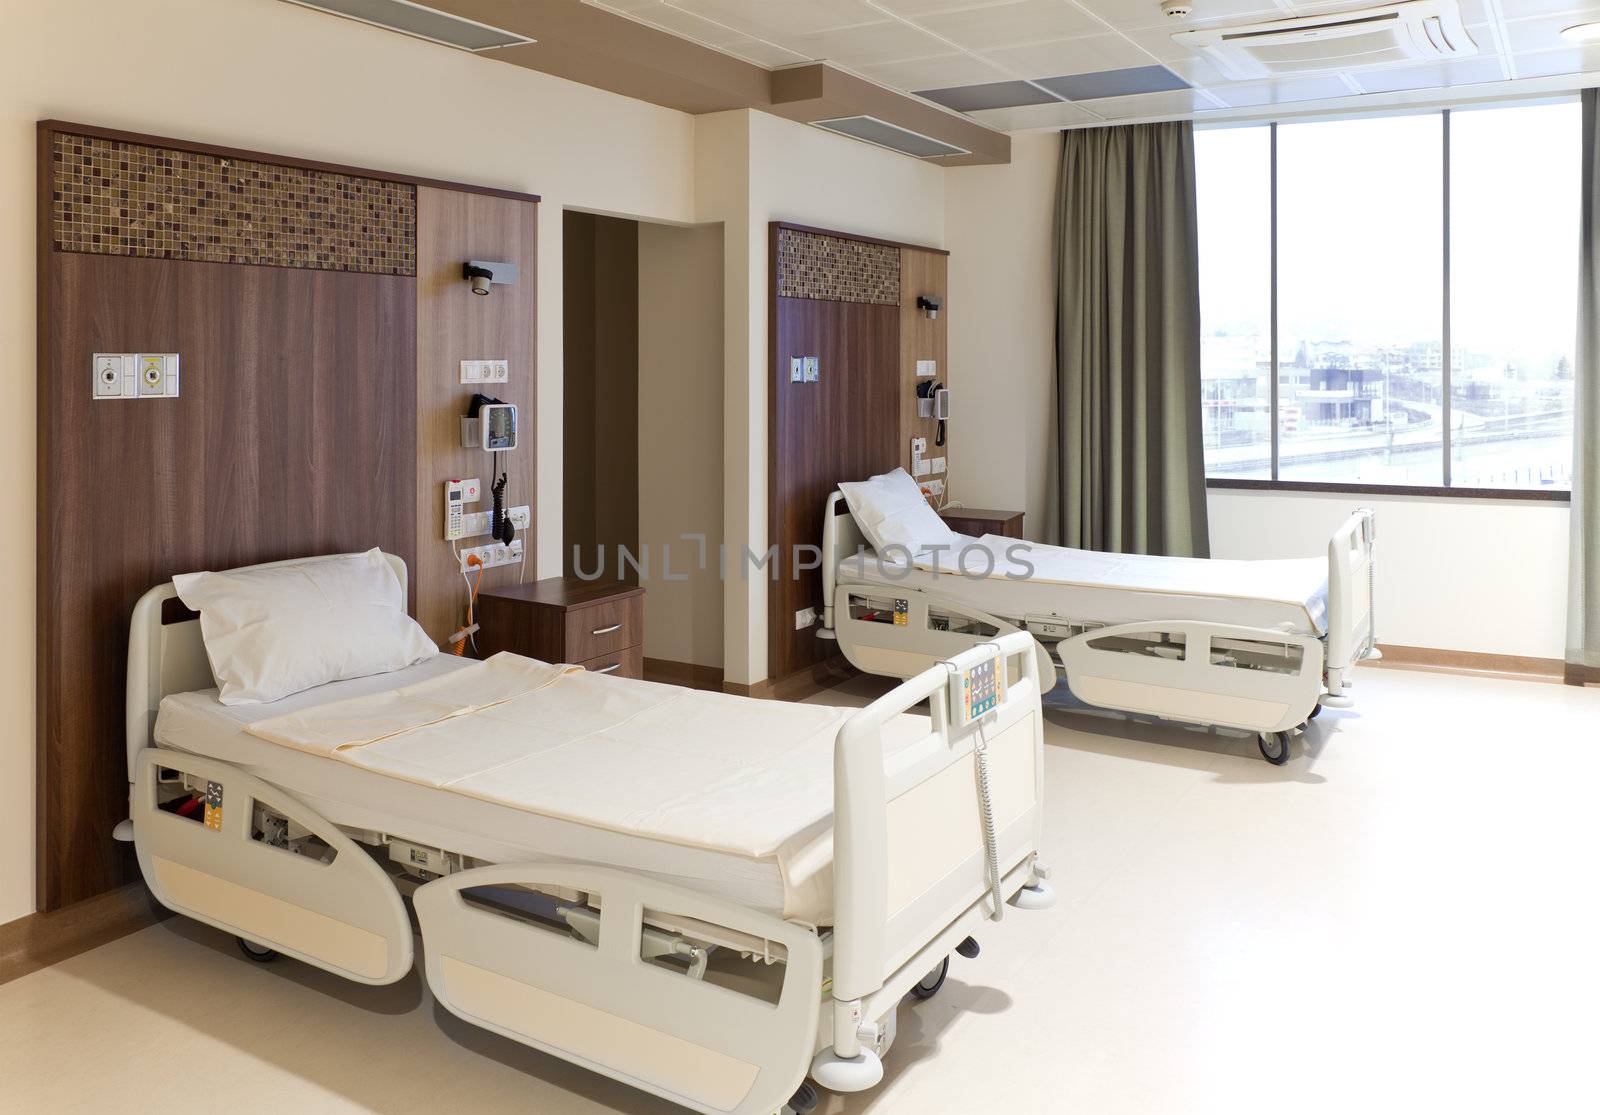 Modern equipped hospital room with two empty beds